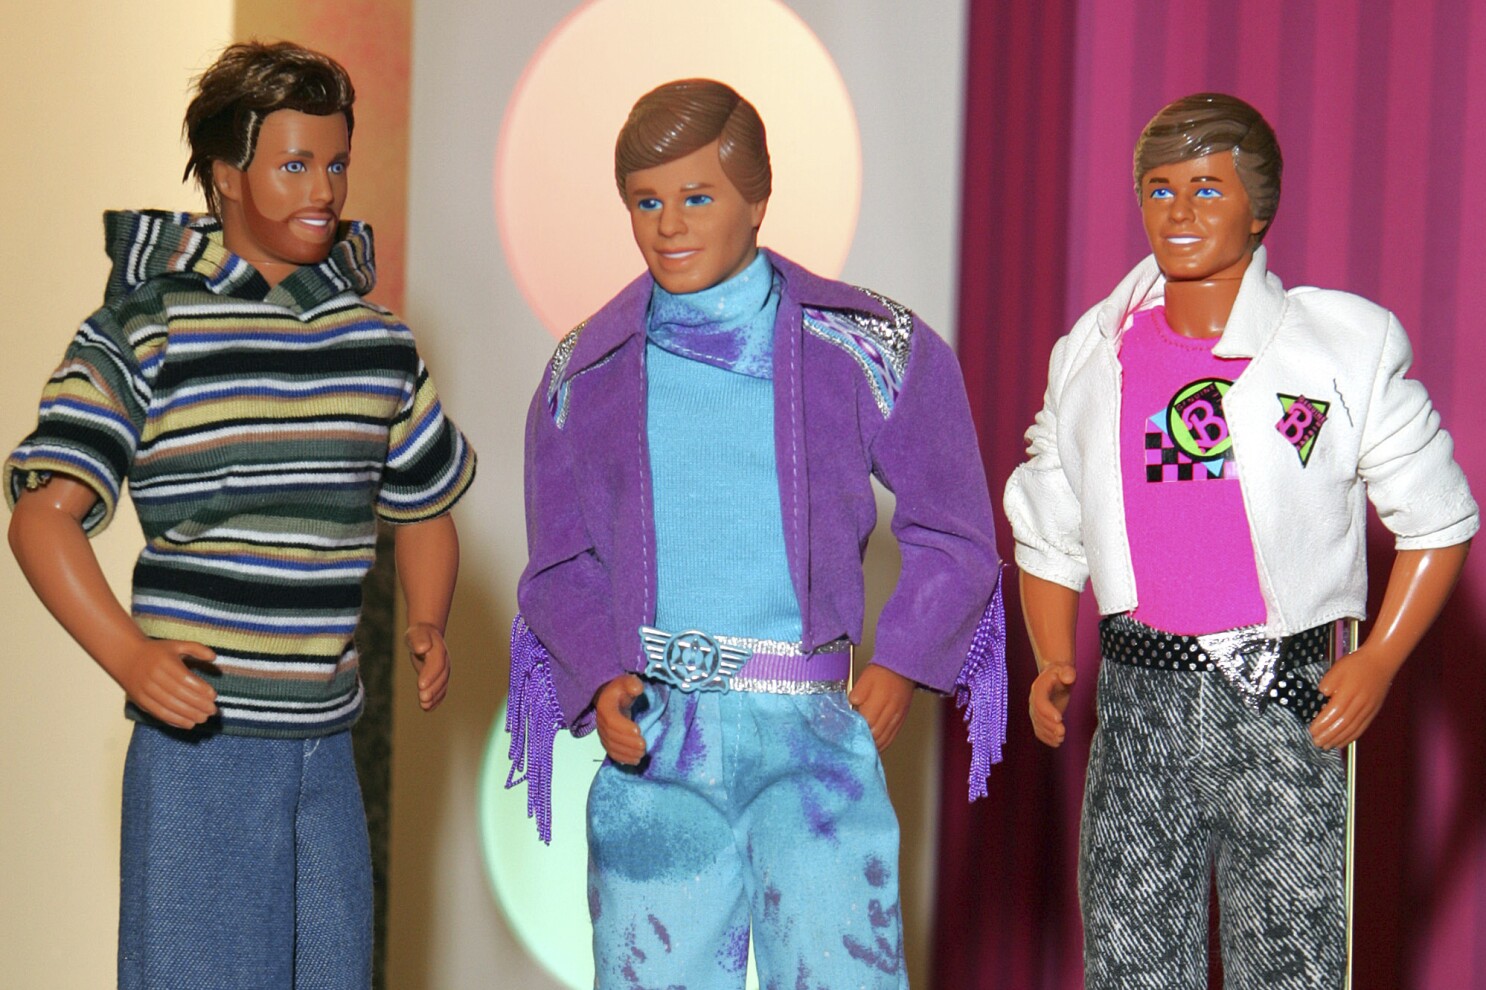 He's 'just Ken' but will the 'Barbie' movie change his popularity?